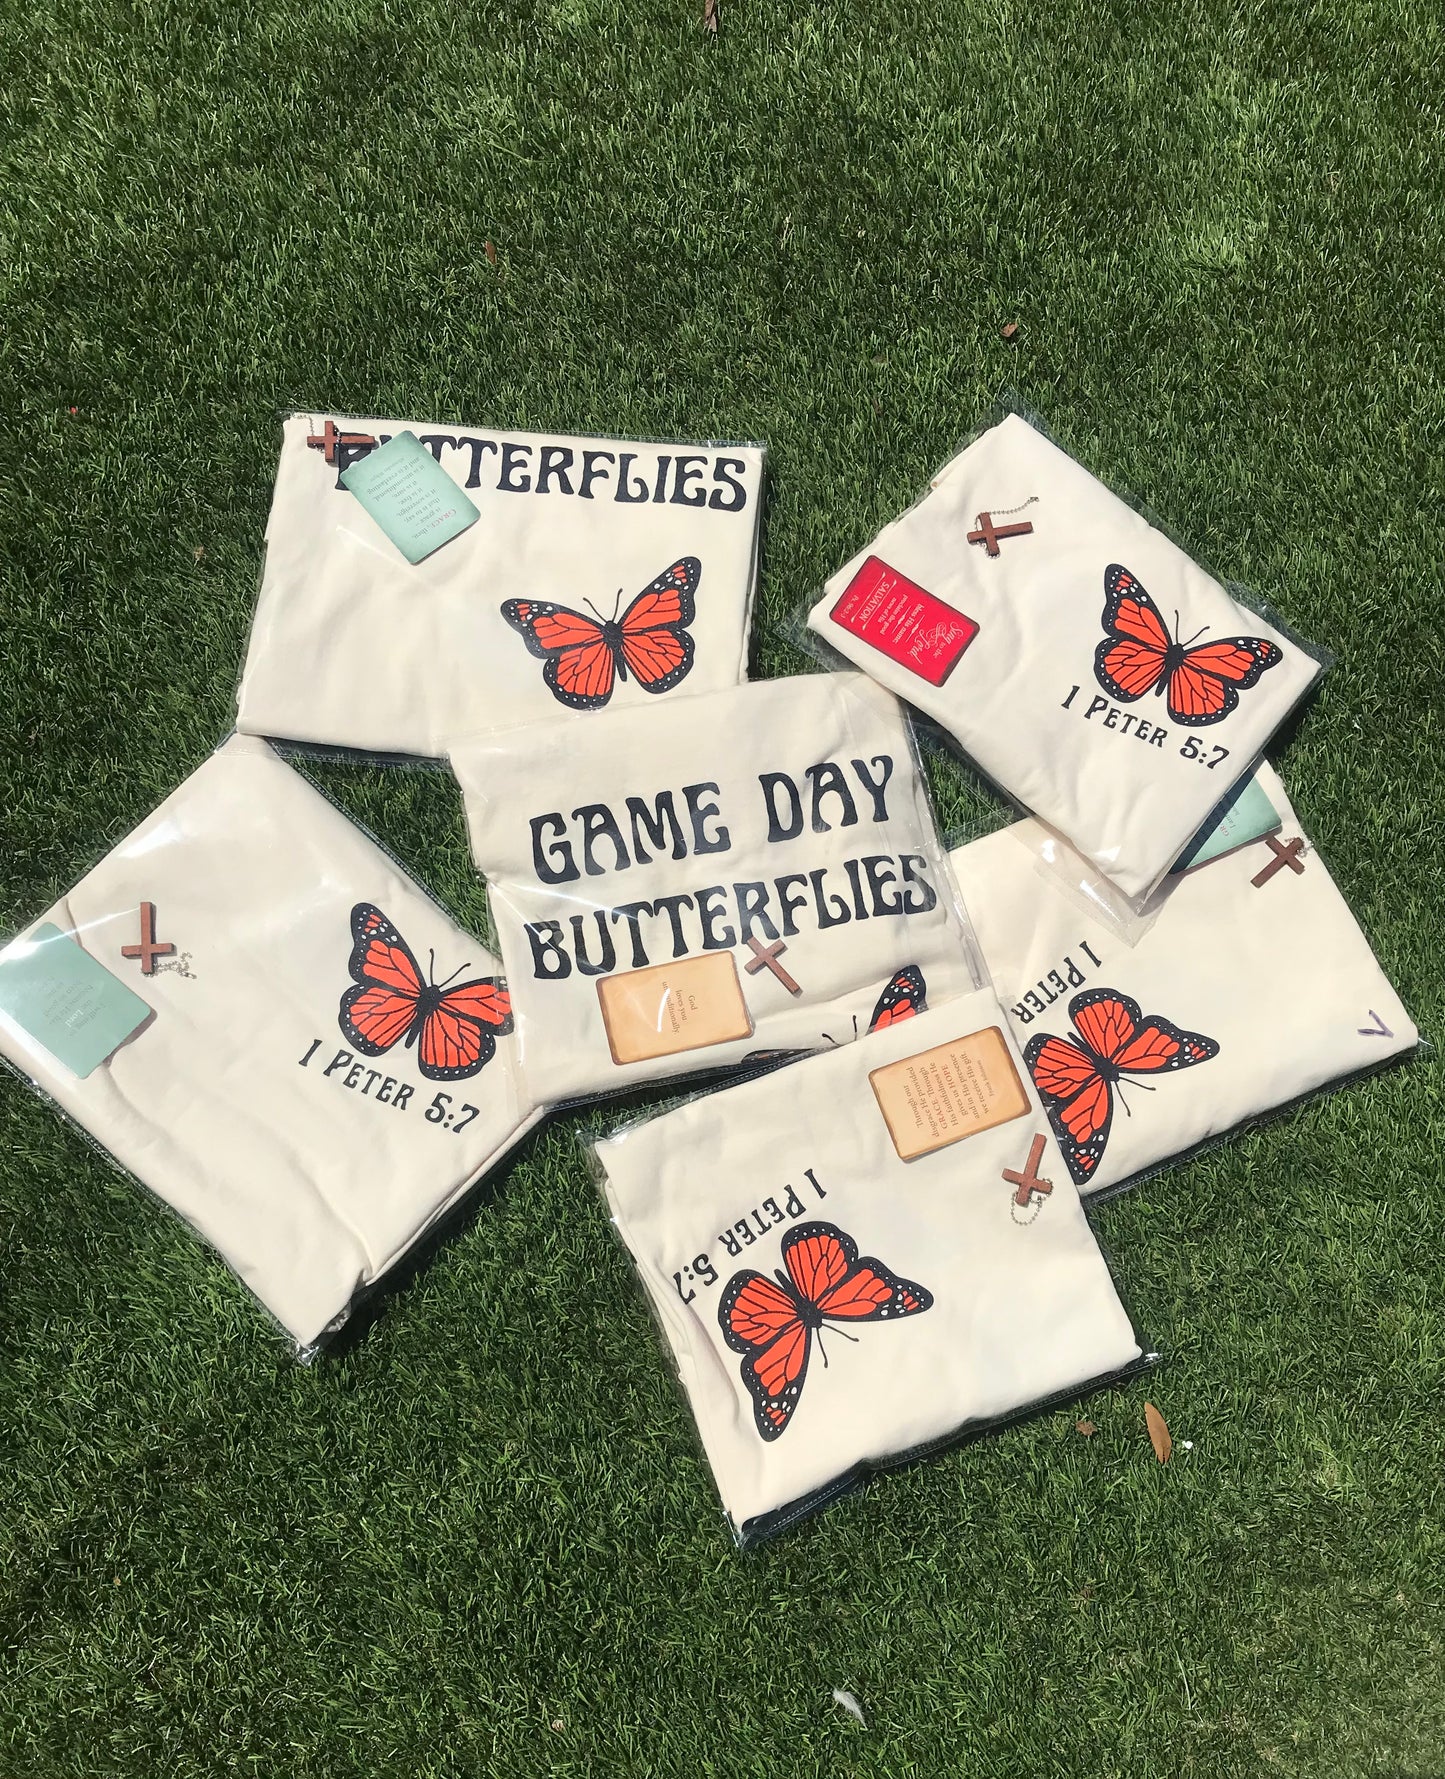 Game day butterfly shirt